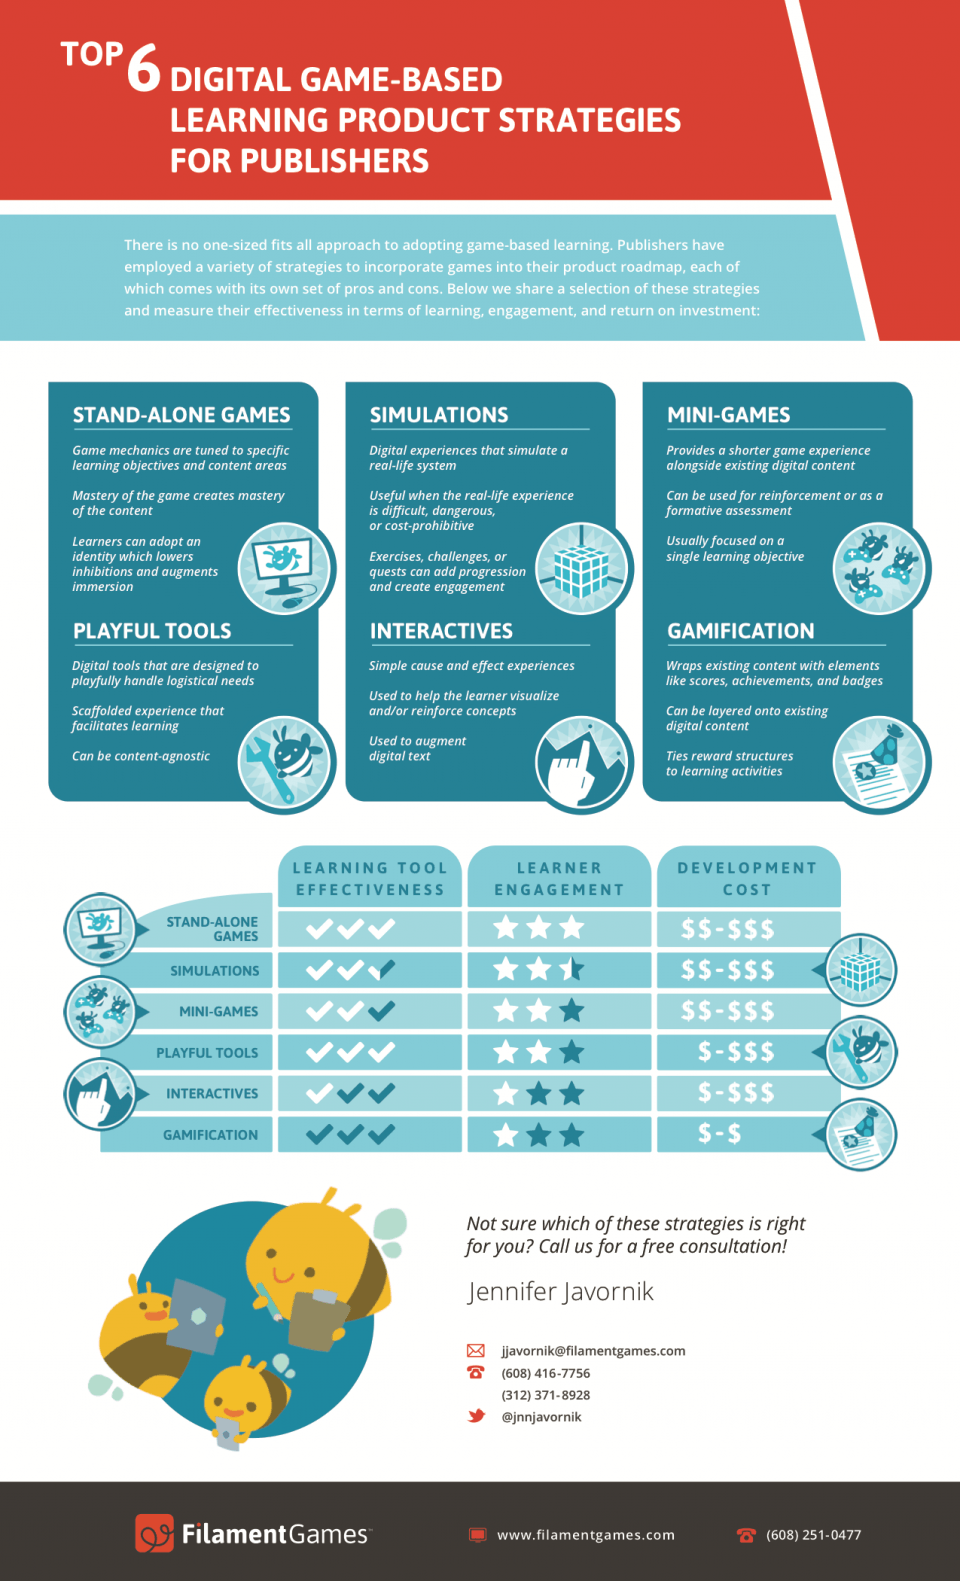 Digital Game-based Learning Product Strategies for Publishers Infographic